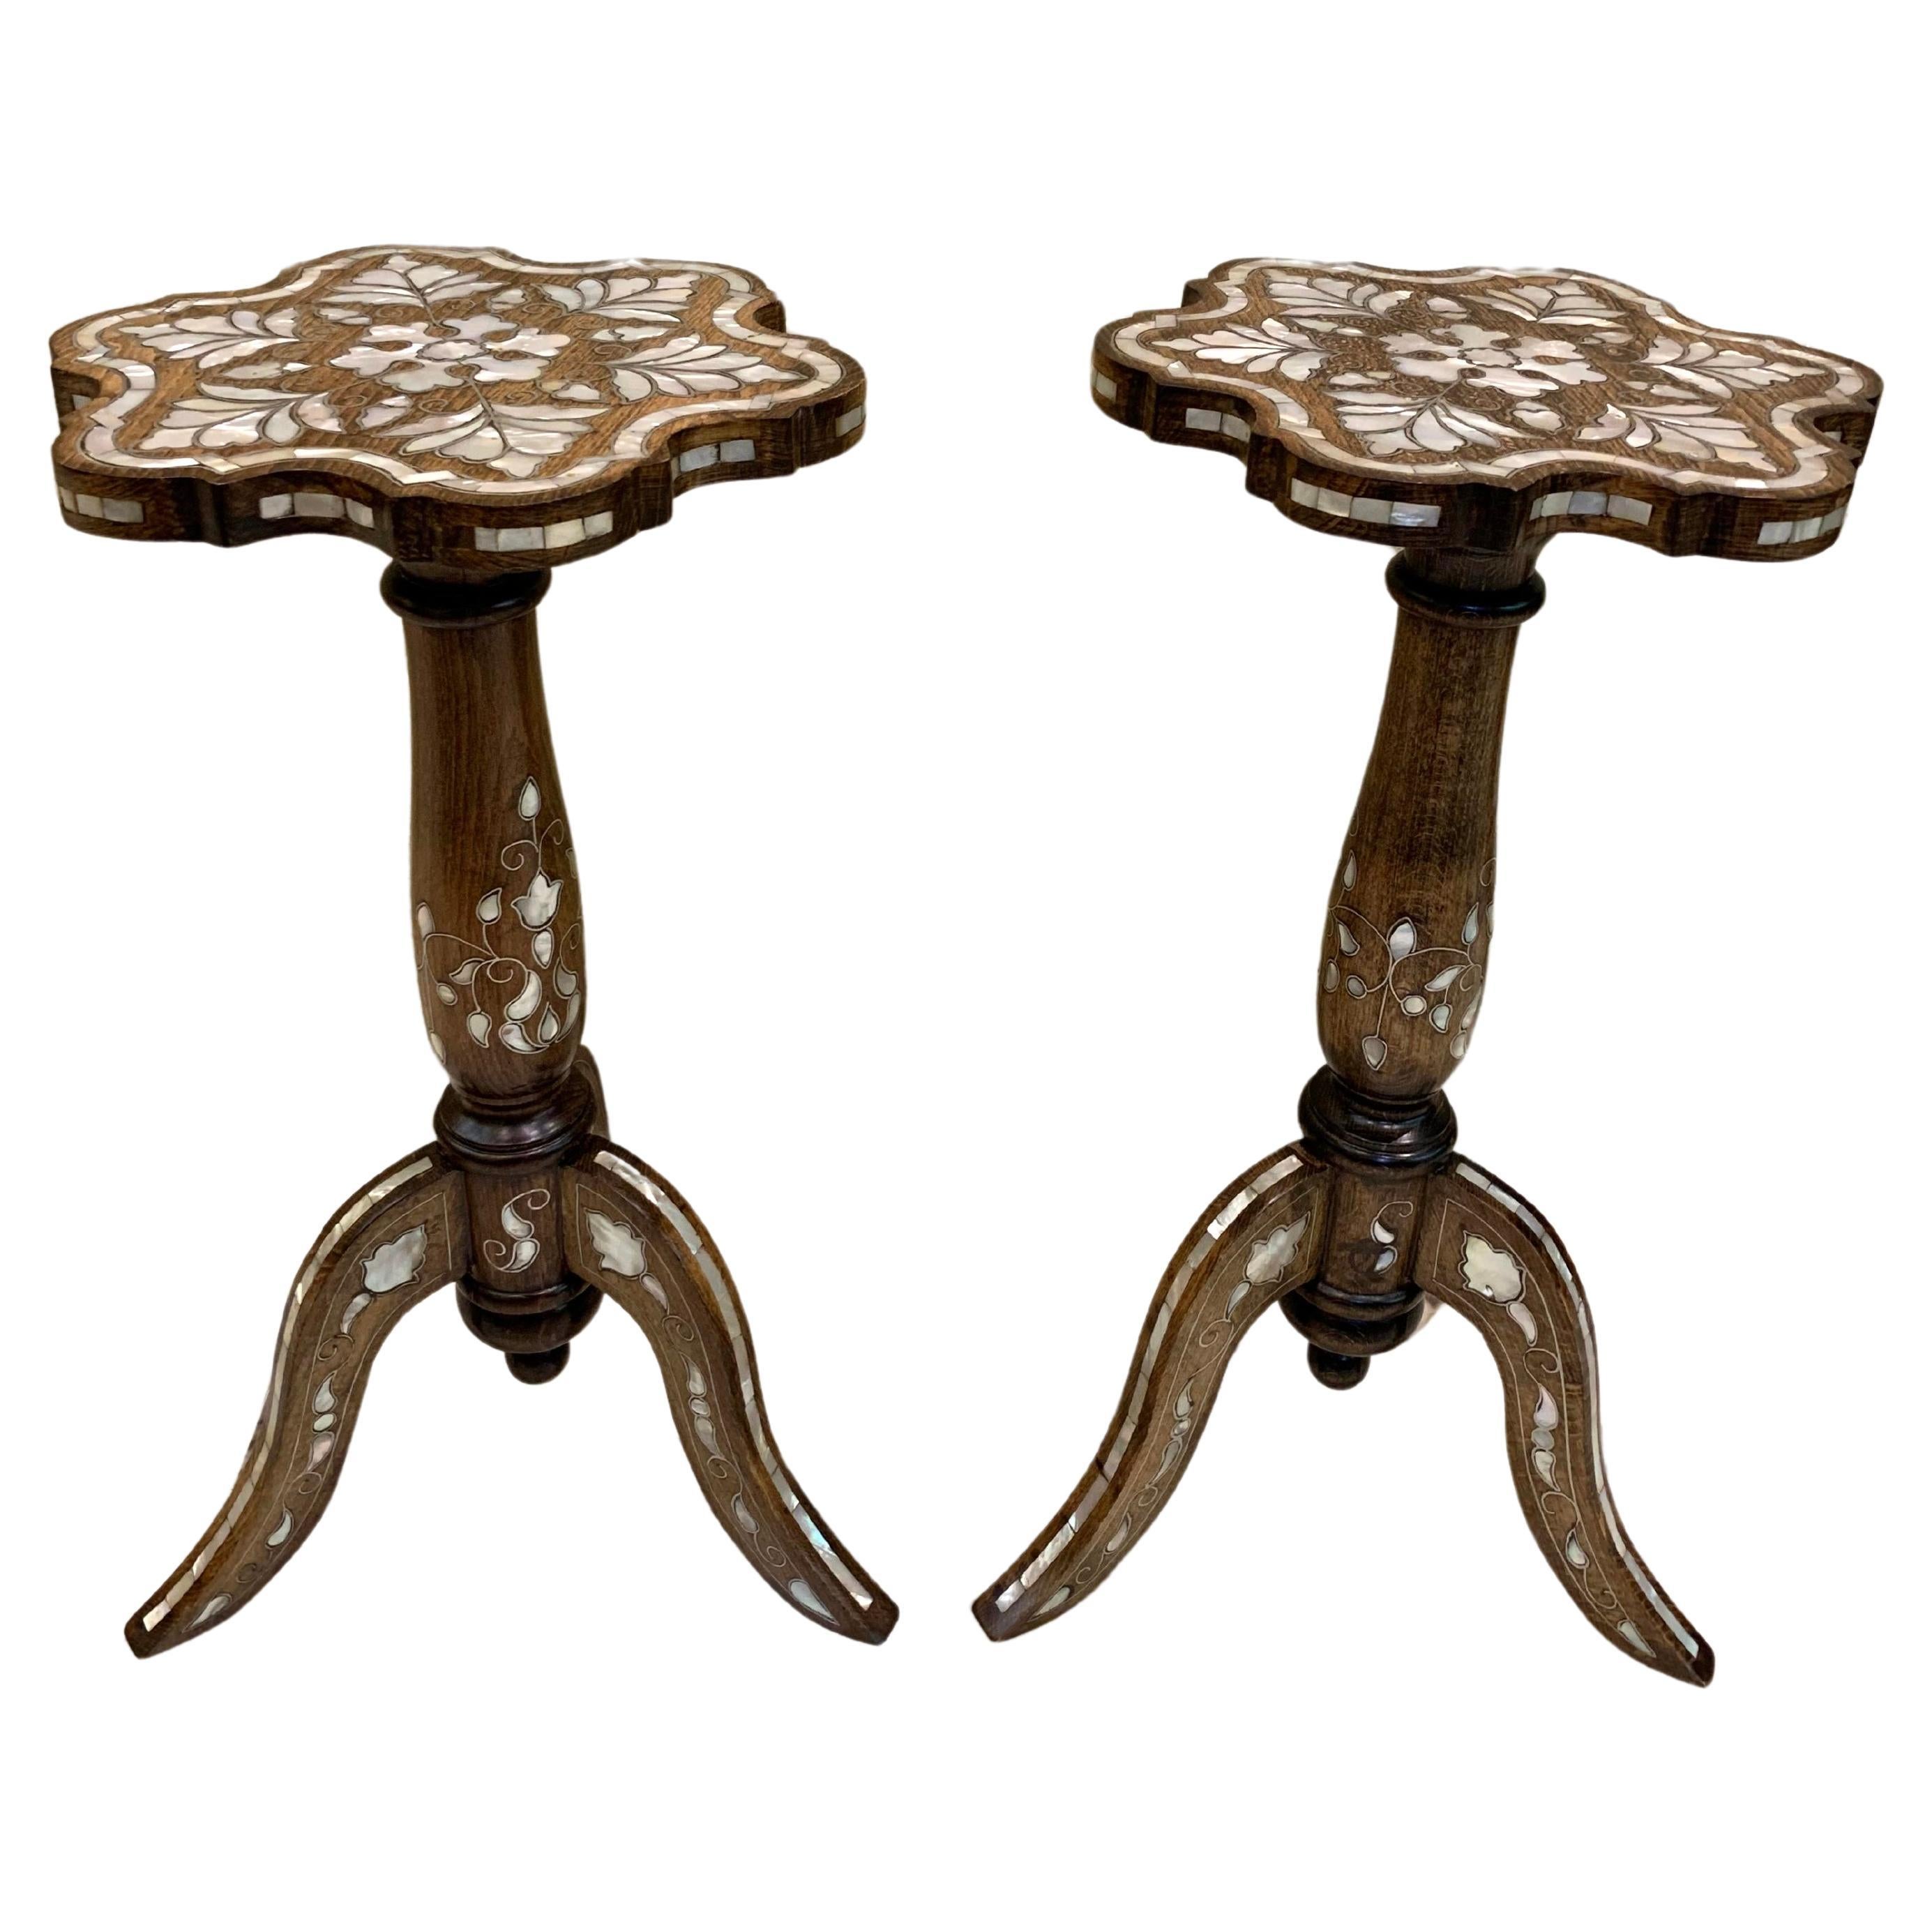 Handcrafted Pair of Wooden Coffee Tables with Mother-of-Pearl Inlaid Legs For Sale